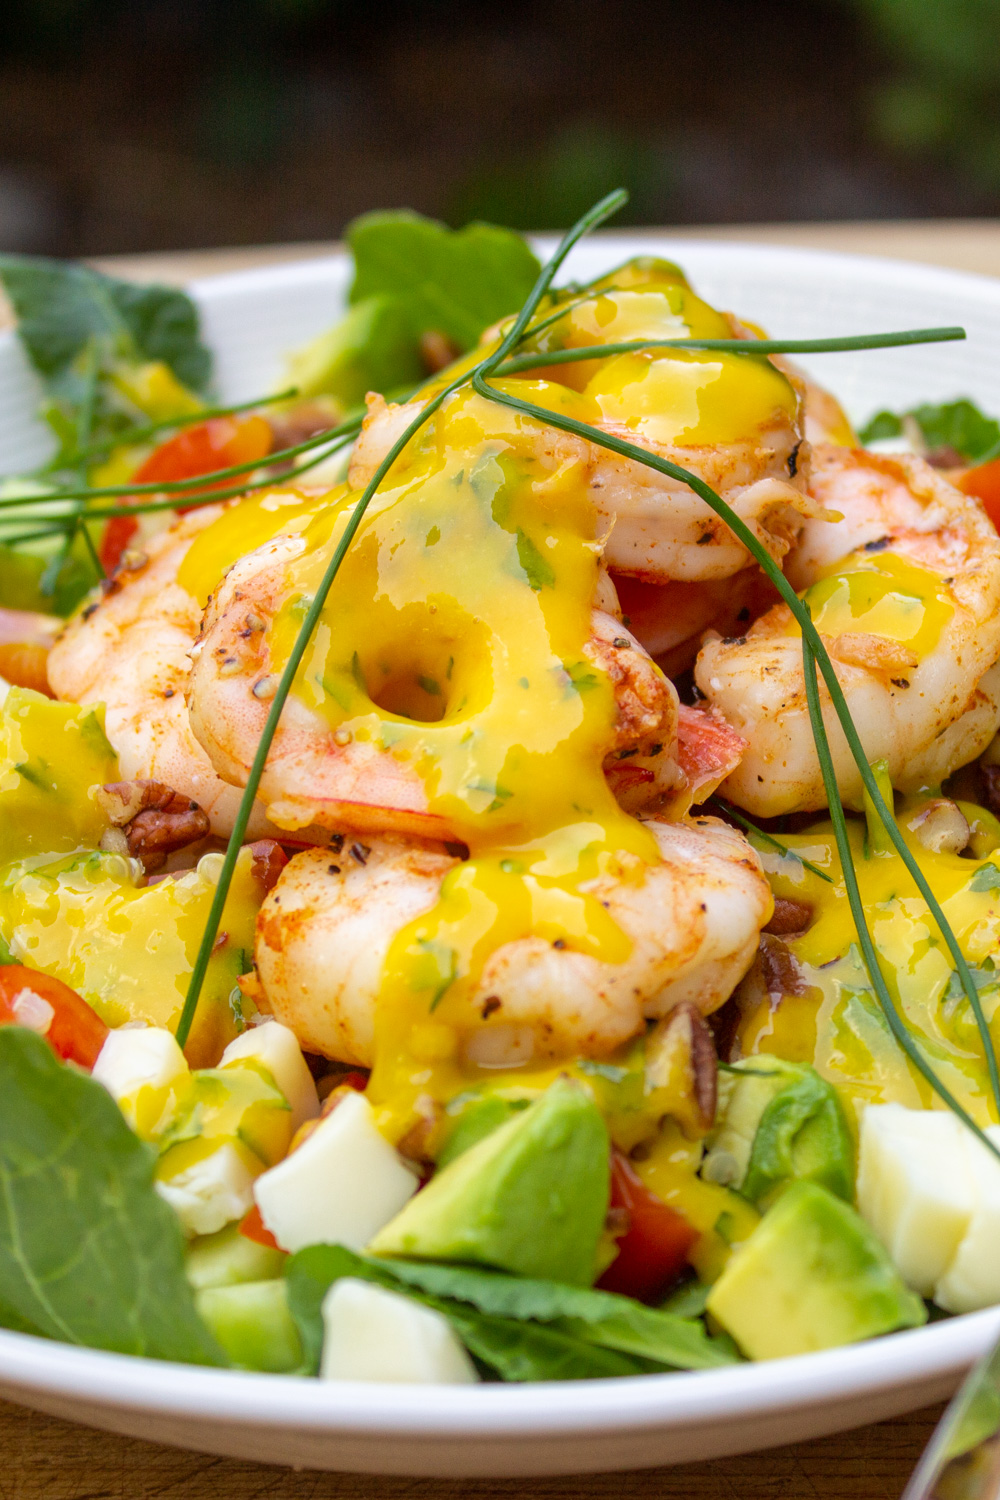 salad with shrimp and mango dressing on top